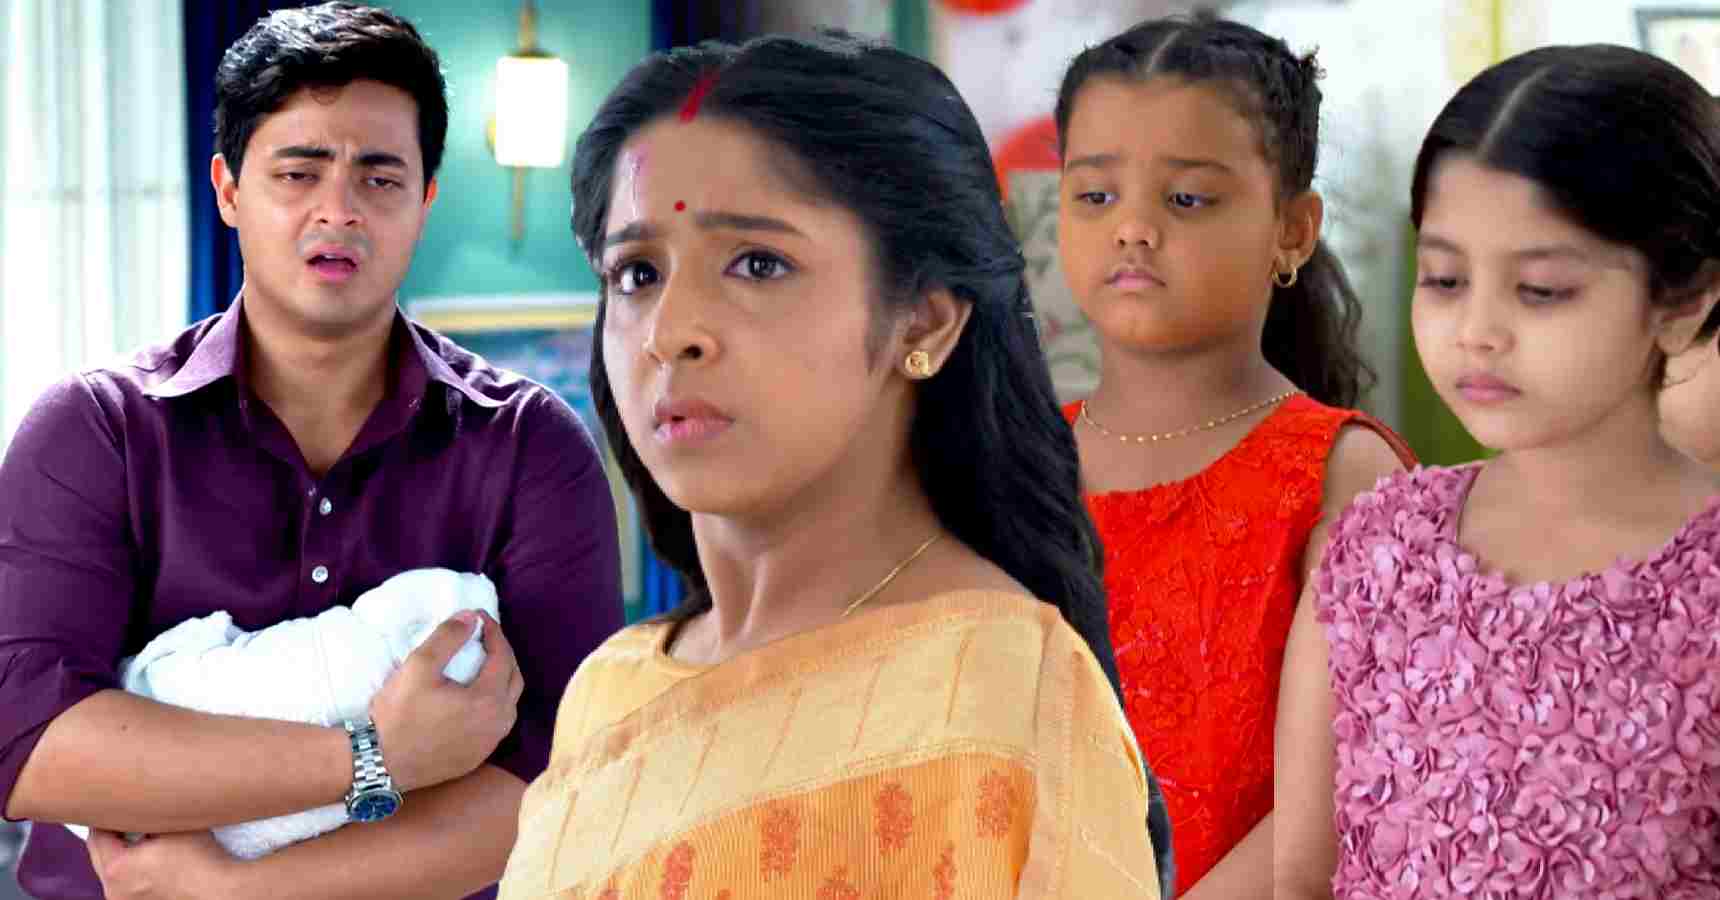 anurager chowa serial surja forgot his daughter's birthday for mishka's son